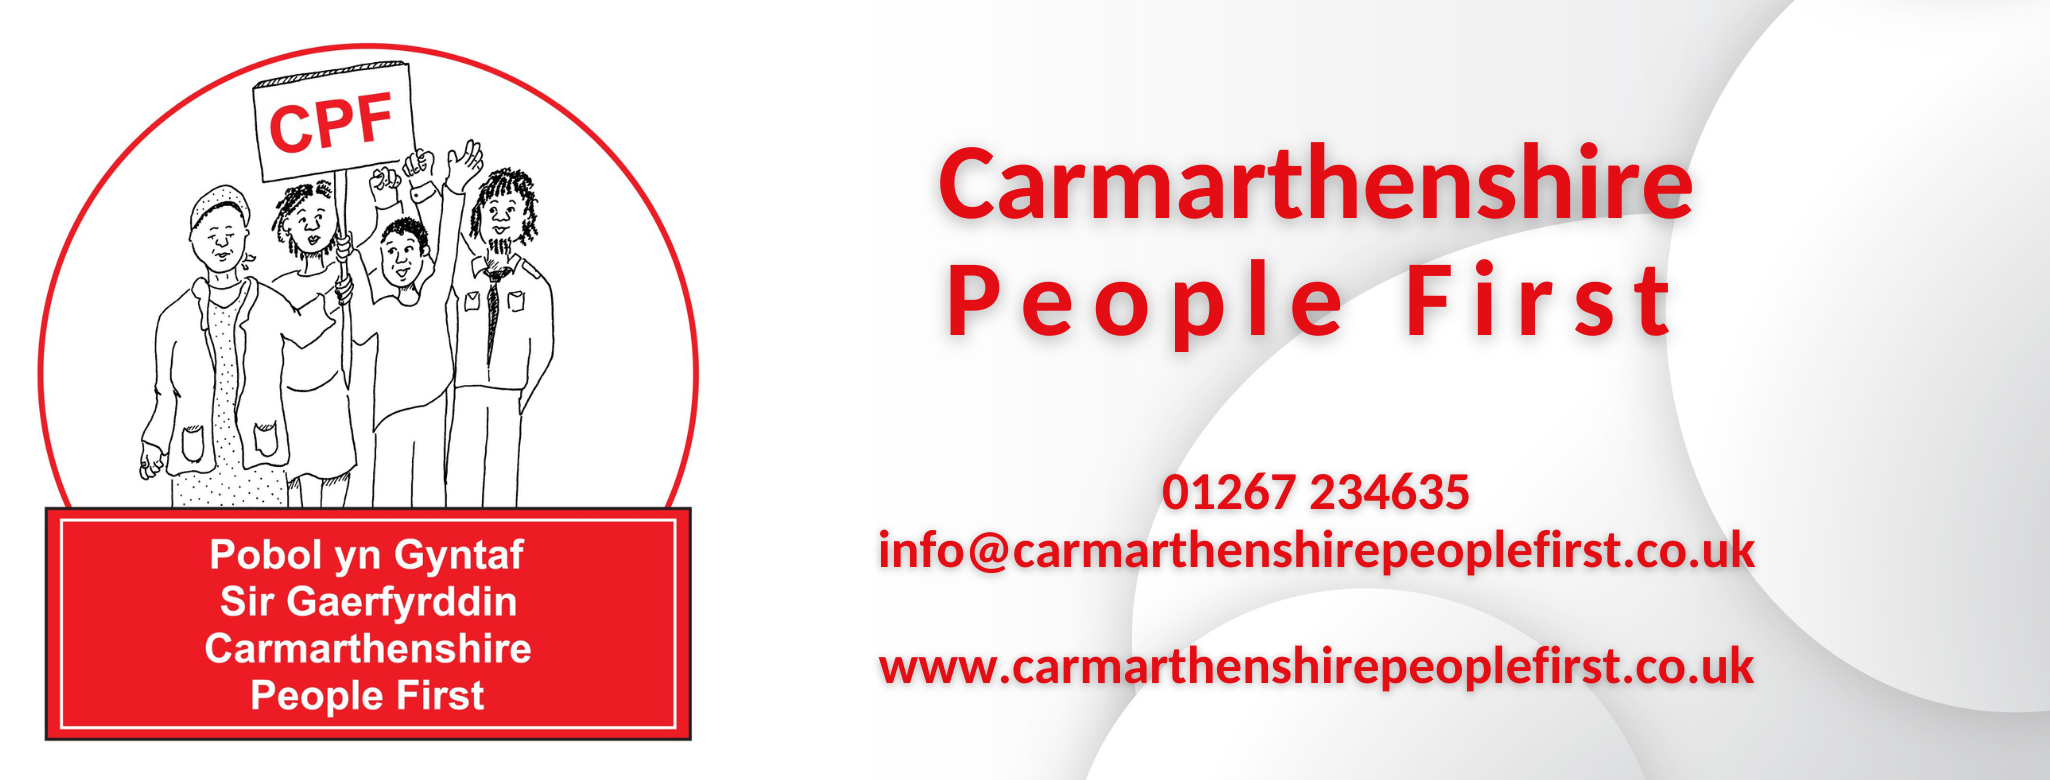 Carmarthenshire People First logo